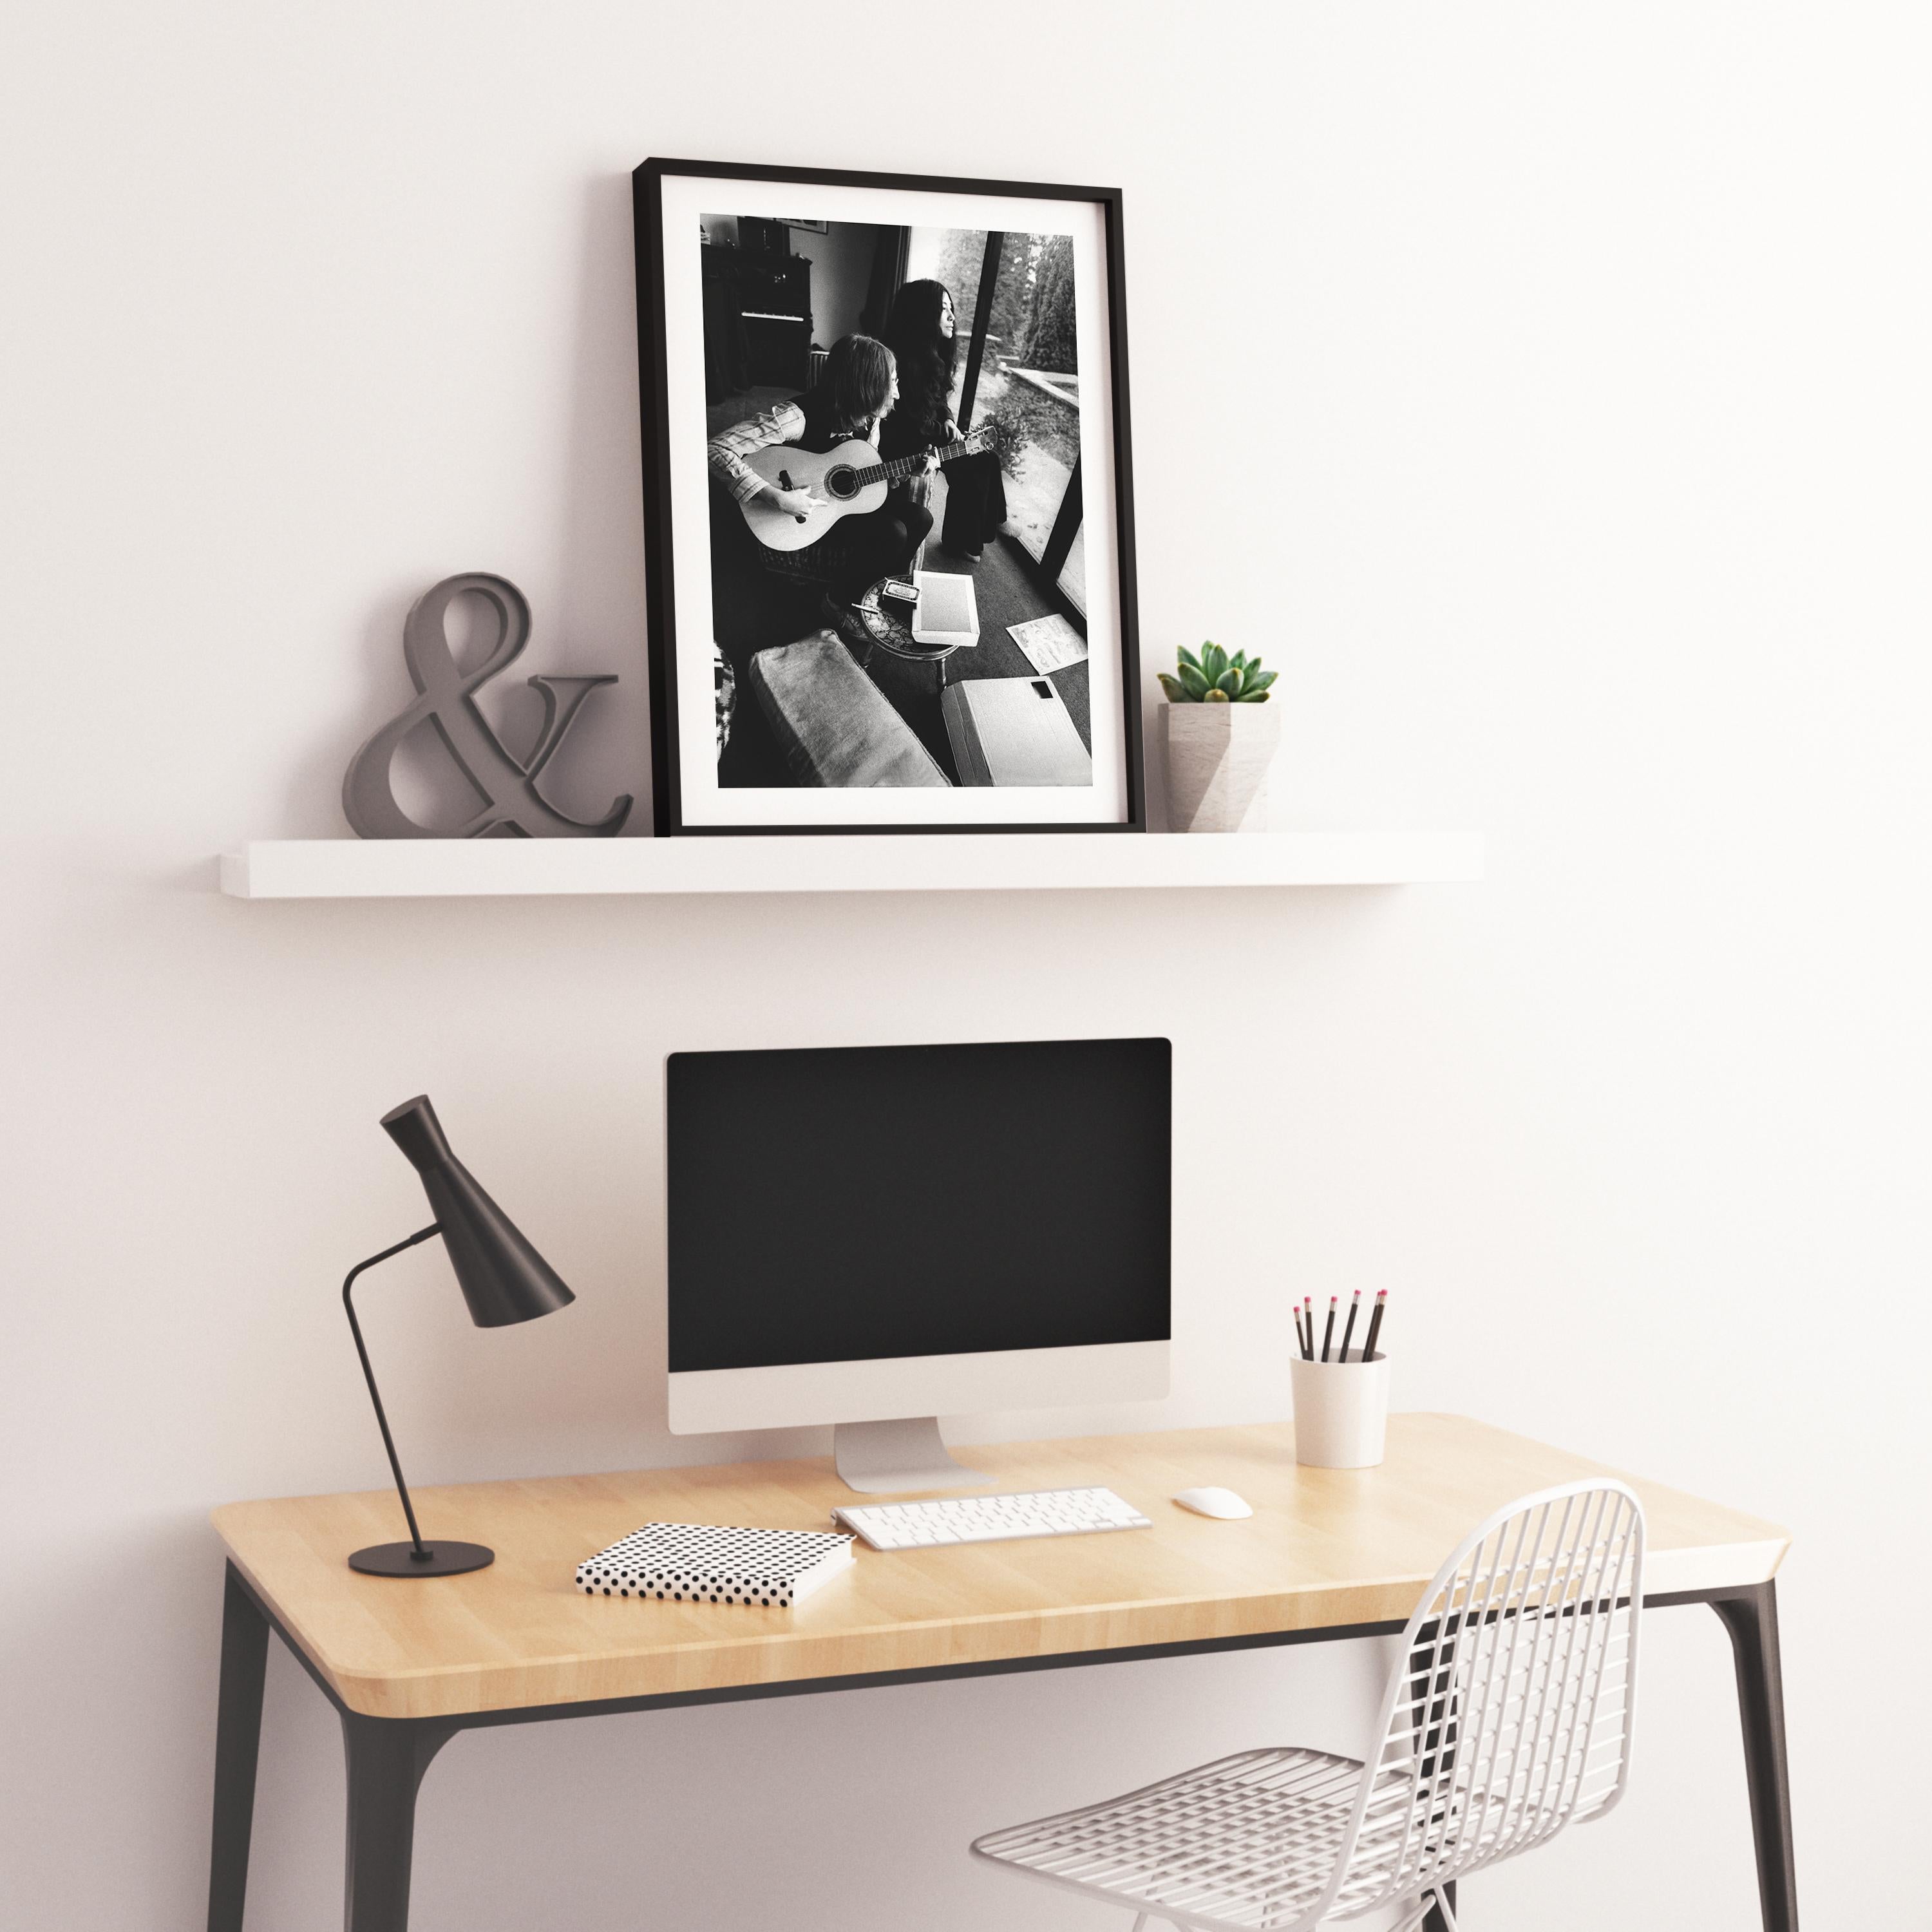 John Lennon and Yoko Ono: Hanging Out II Globe Photos Fine Art Print - Black Black and White Photograph by Unknown